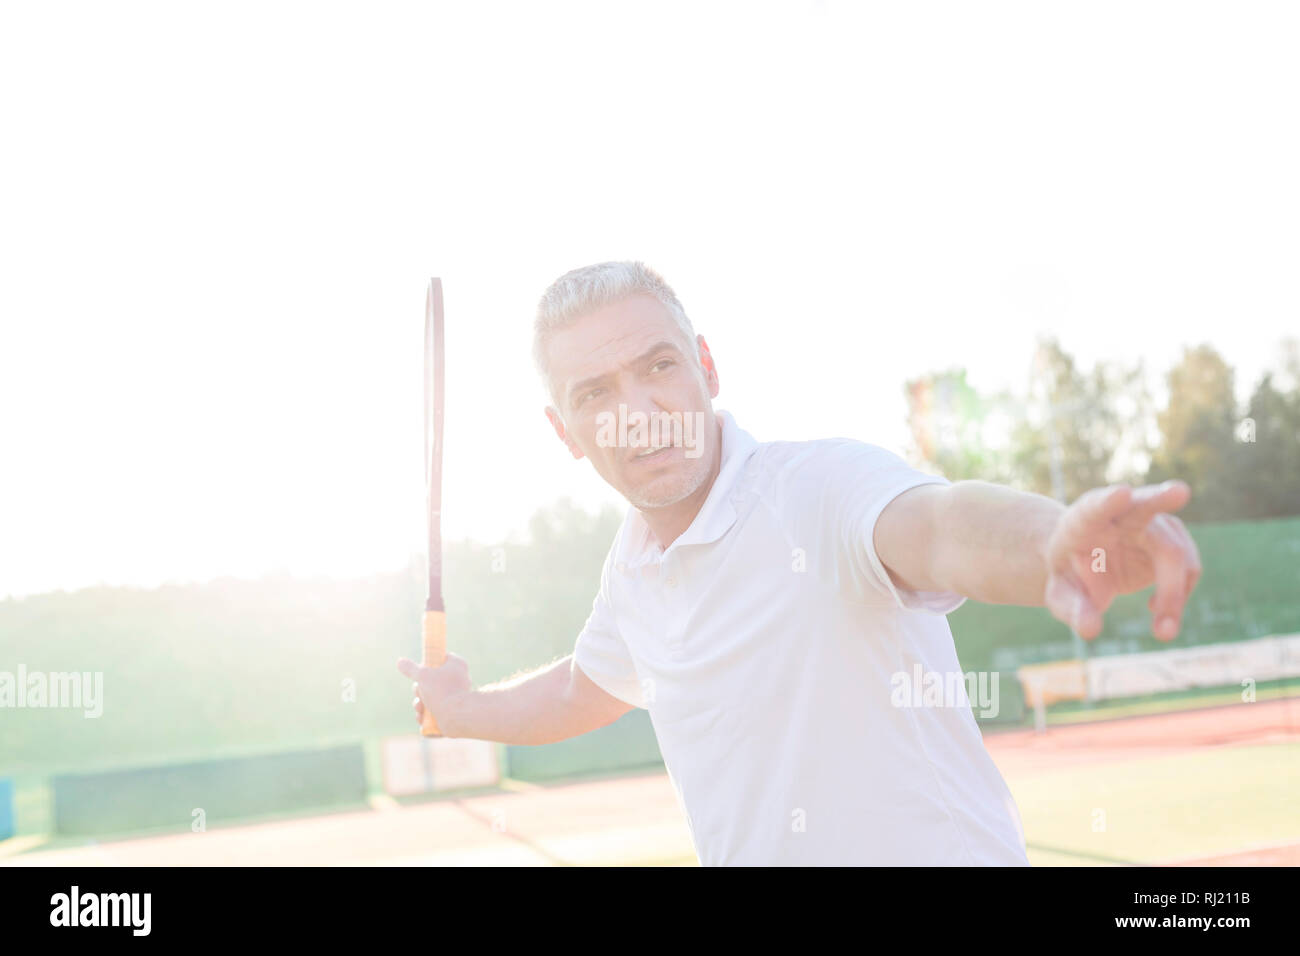 Back lit of mature man swinging tennis racket on court against clear sky Stock Photo